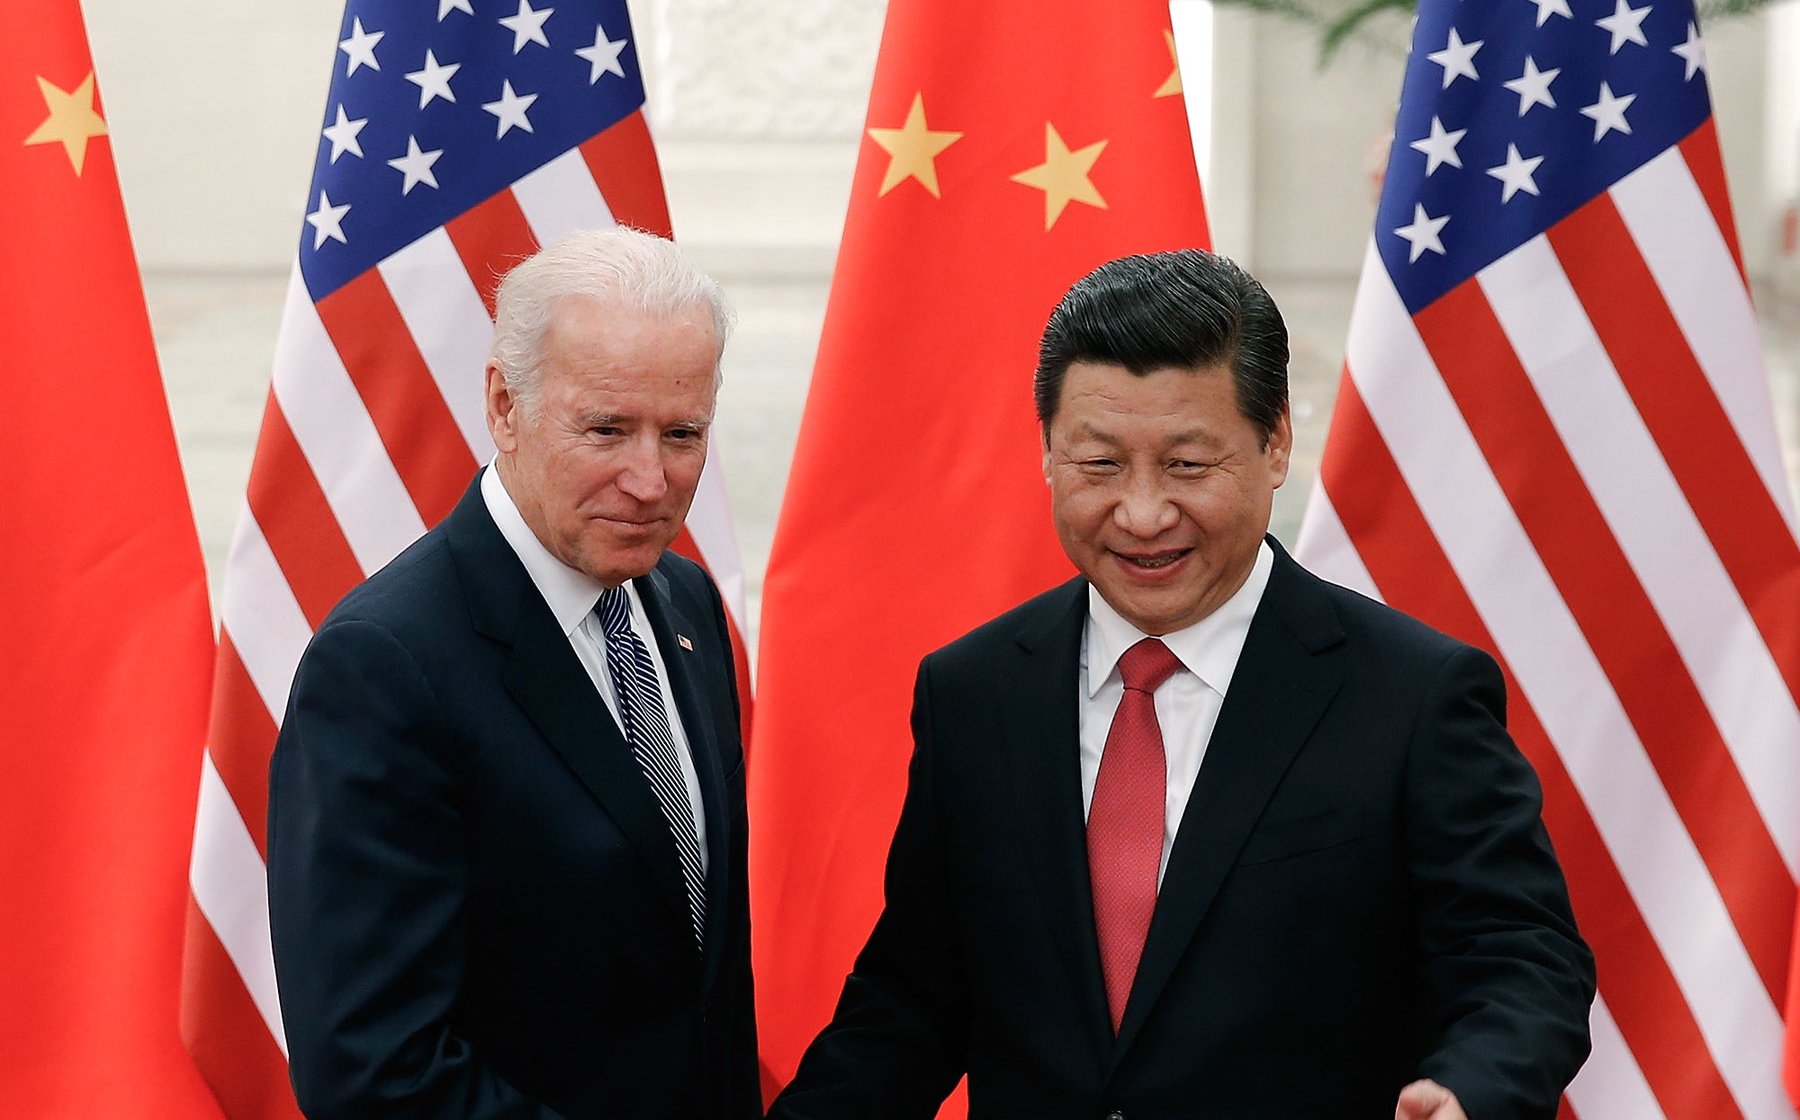 Joseph R. Biden Jr., then vice president, with President Xi Jinping of China in 2013.Credit...Lintao Zhang/Getty Images